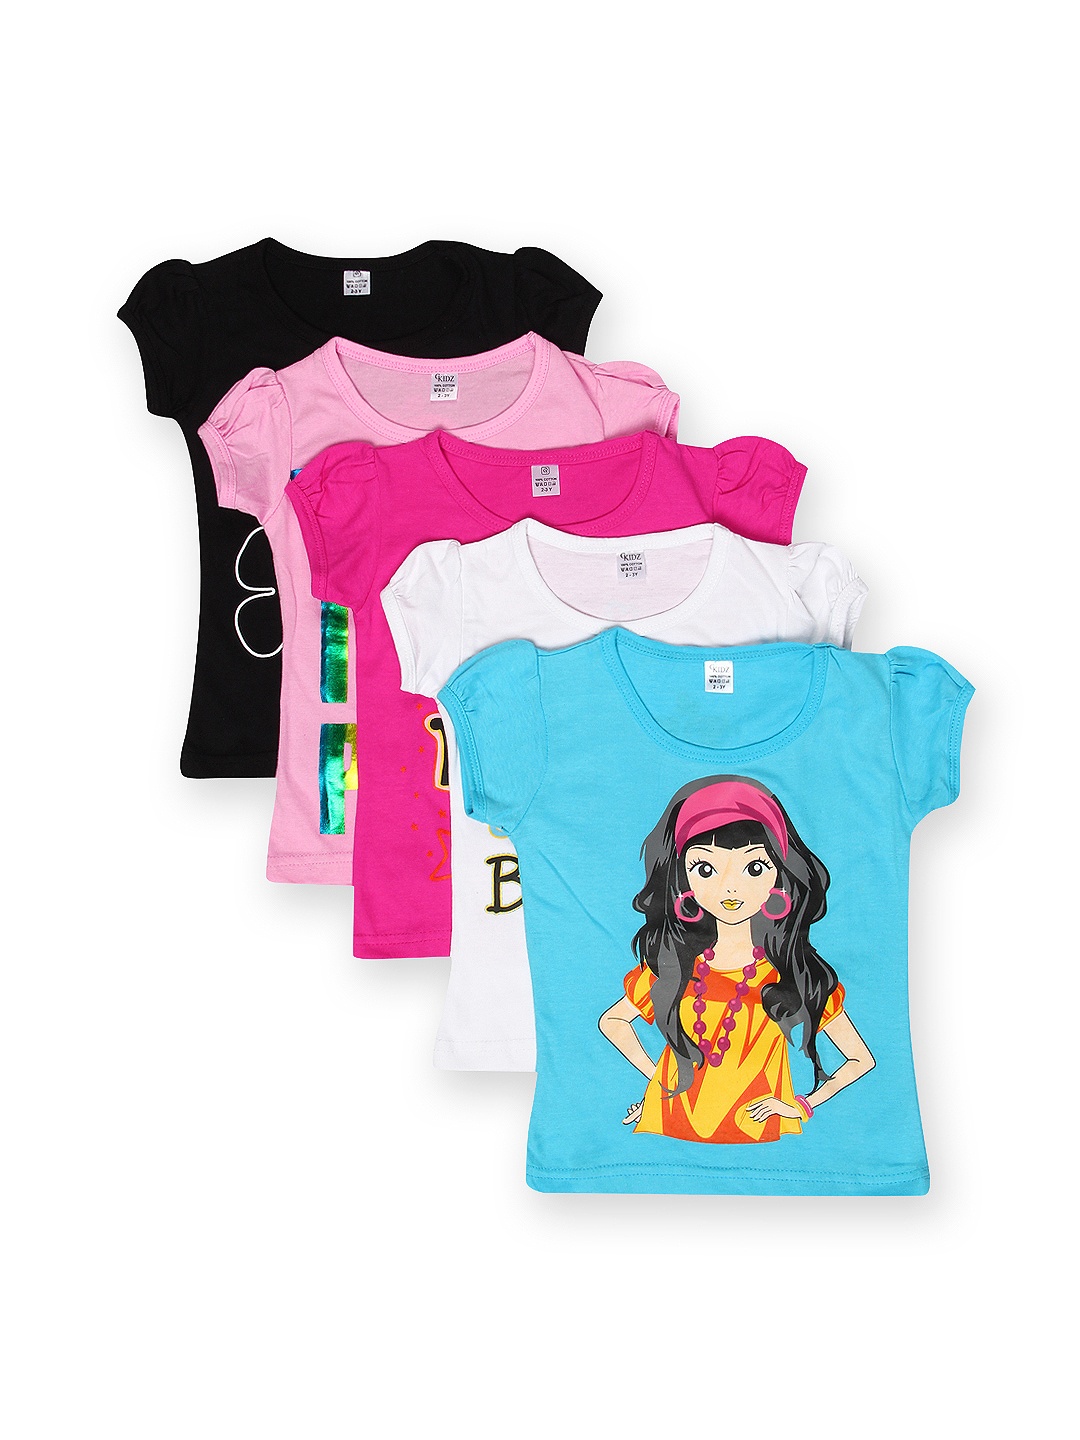 

GKIDZ Girls Pack of 5 Printed Pure Cotton T-shirts, Multi